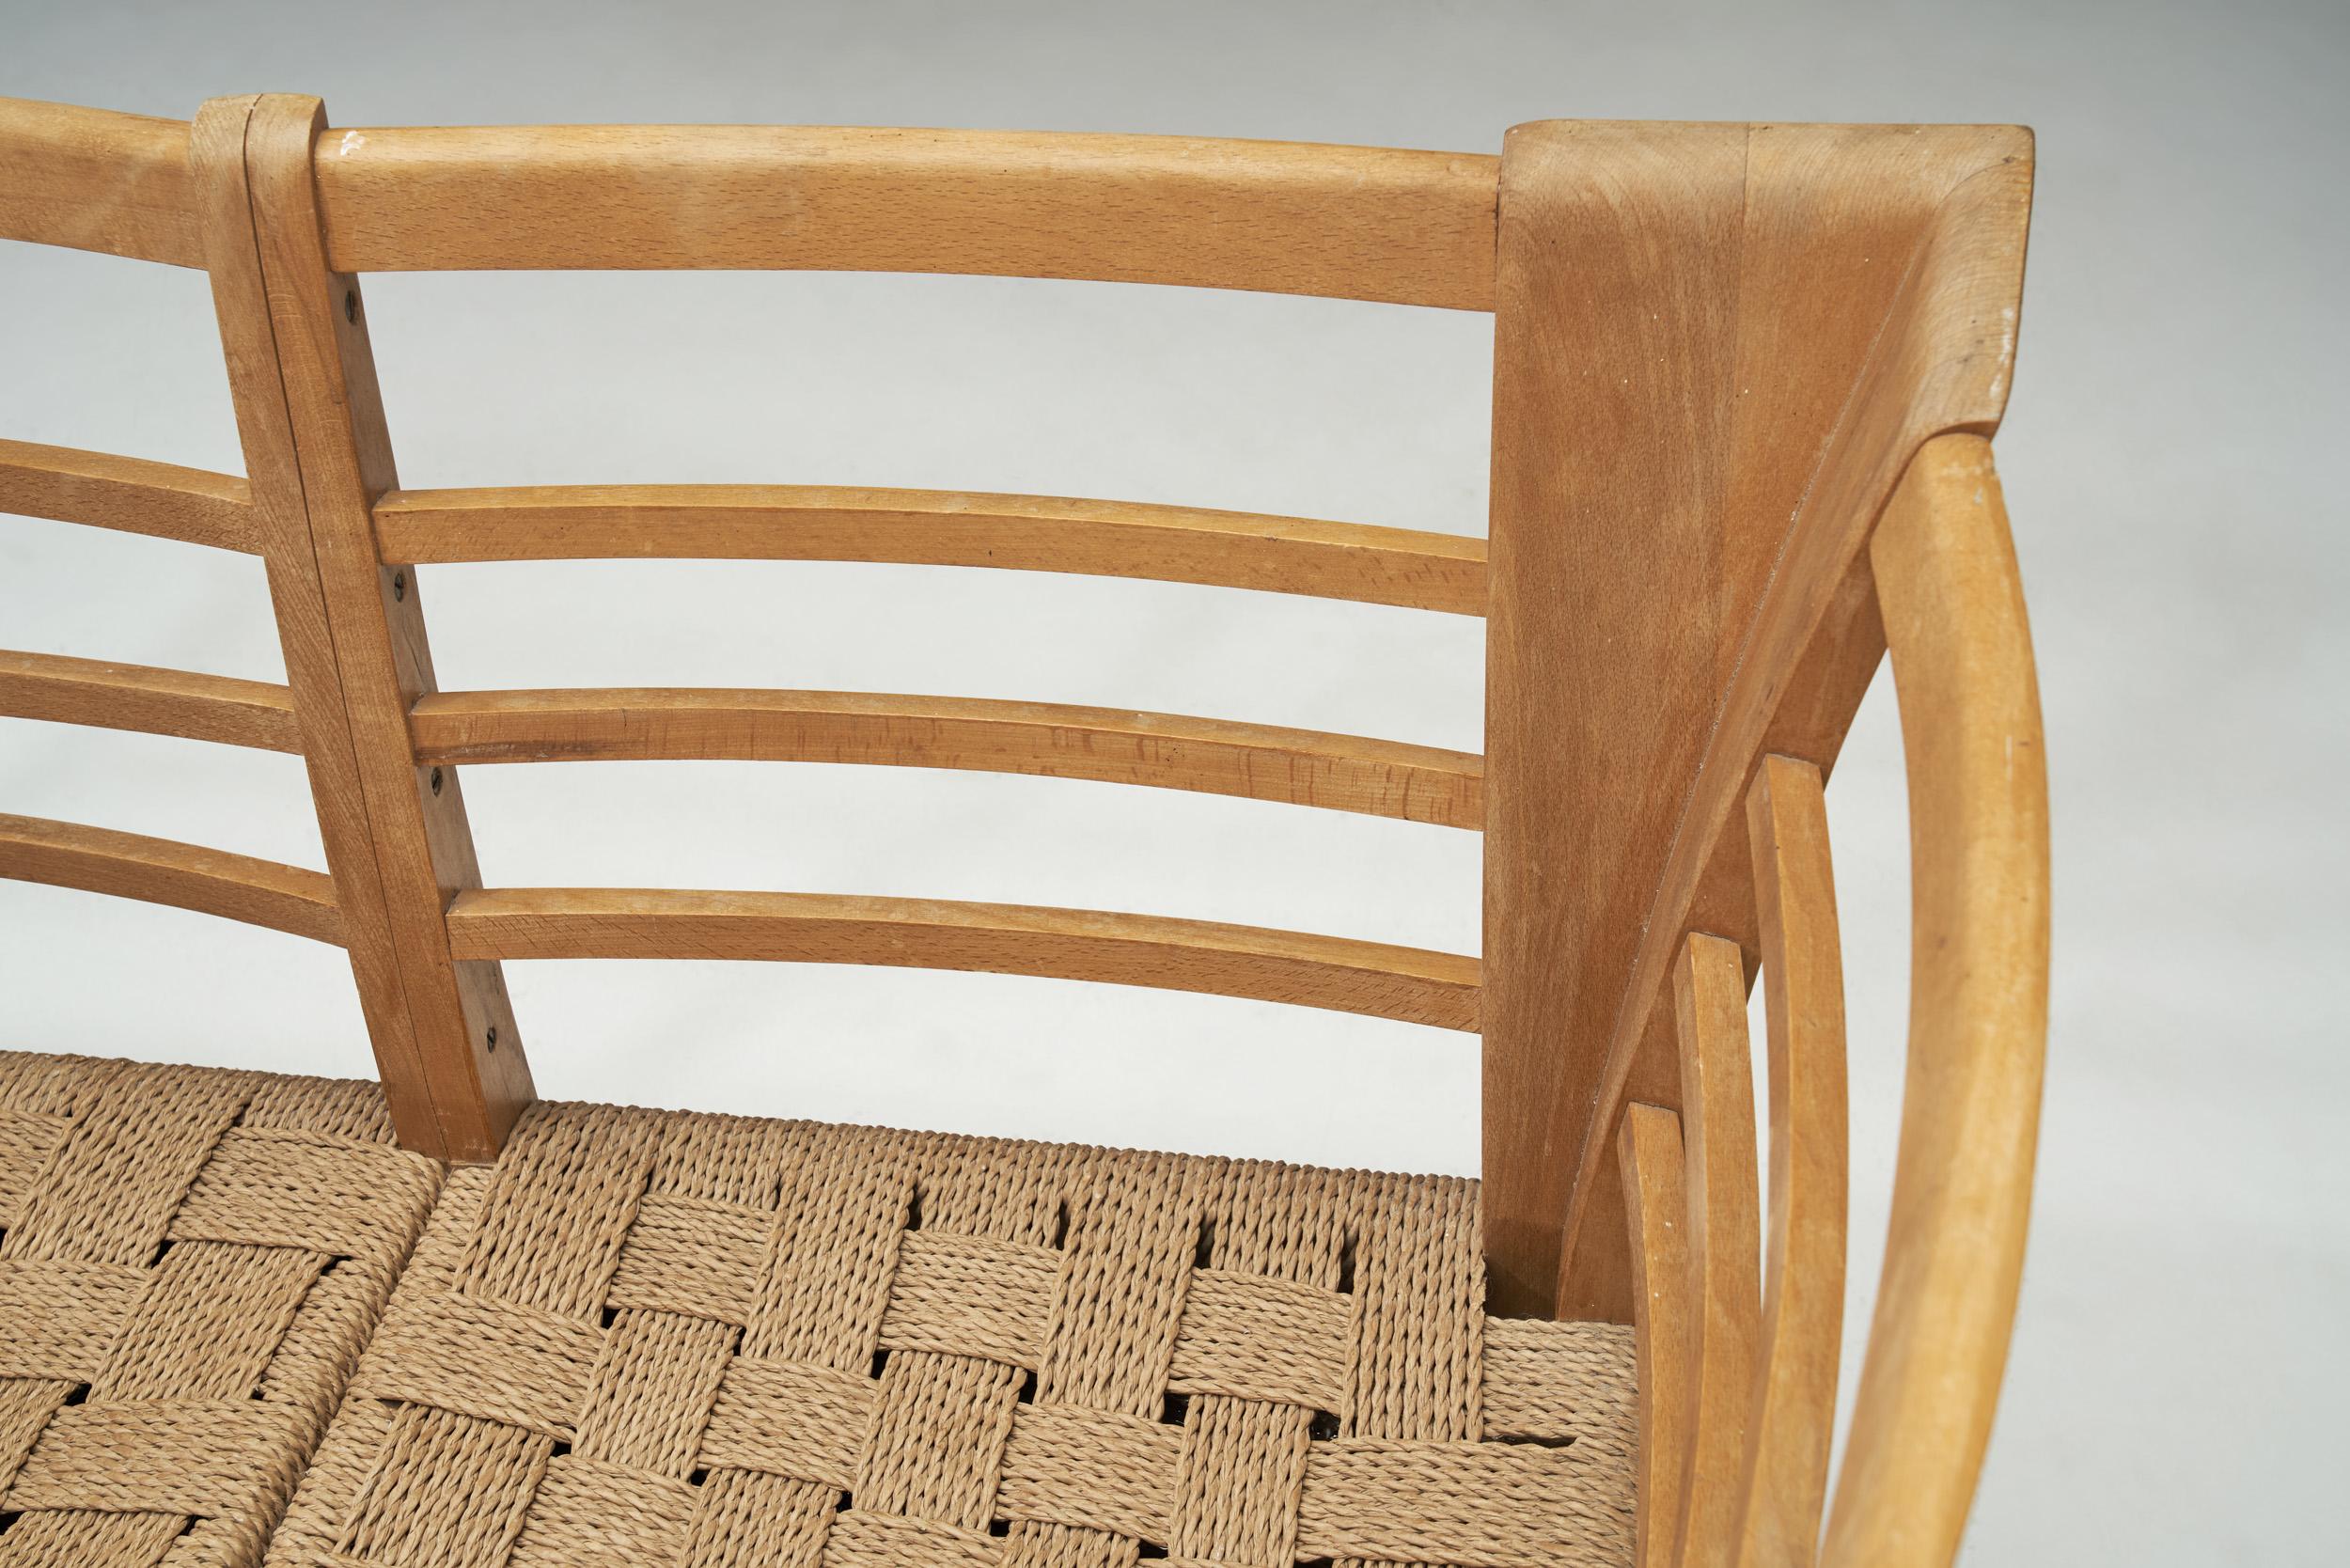 Papercord Danish Beech Wood Corner Bench with Woven Paper cord Seat, Denmark, 1940s